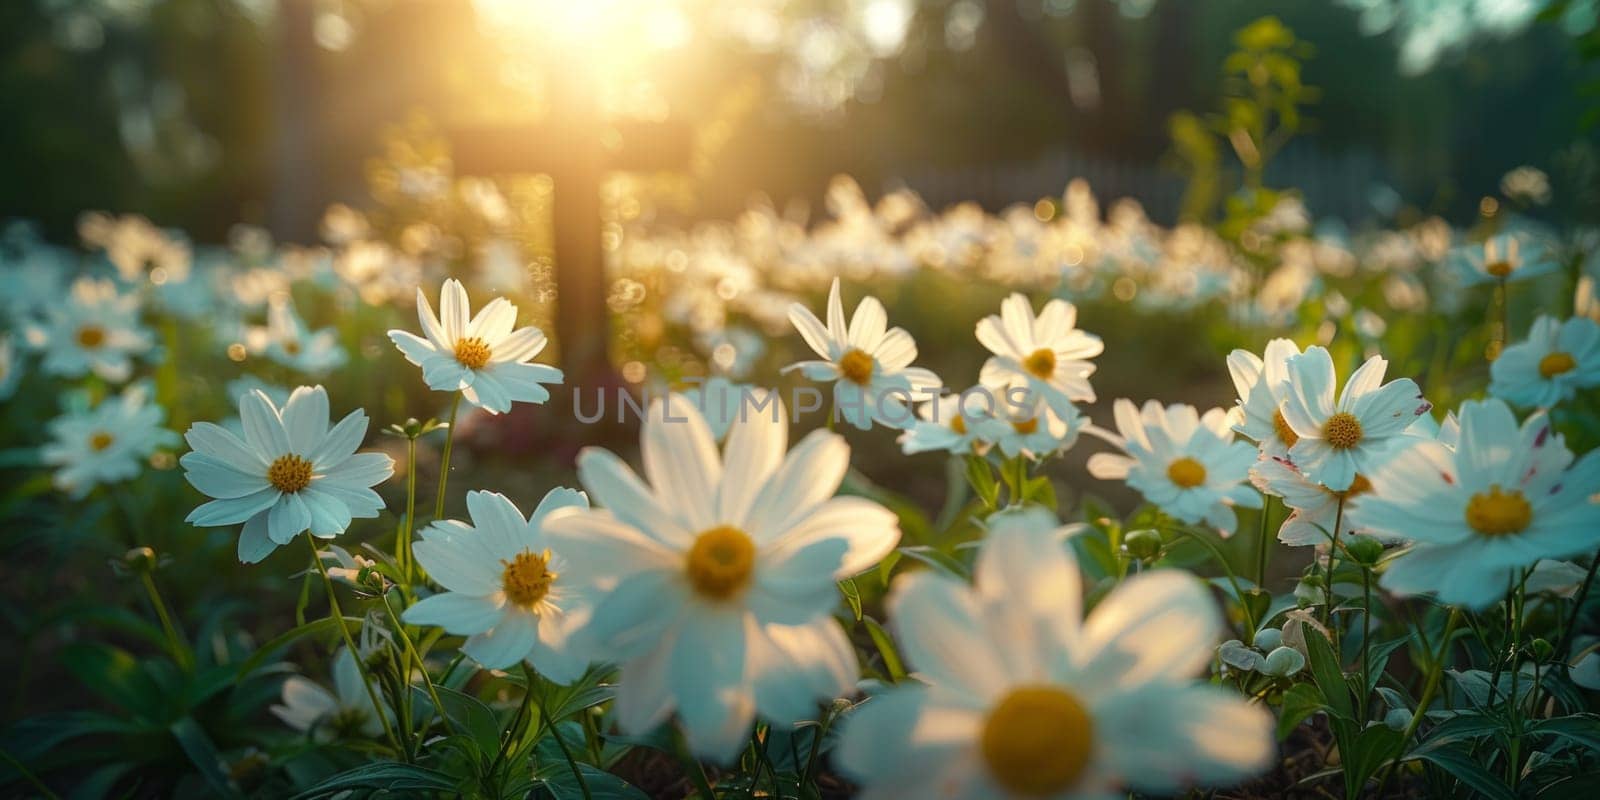 A field of blooming white daisies stretches out beneath the sun shining through the trees, creating a picturesque scene of nature in full bloom.